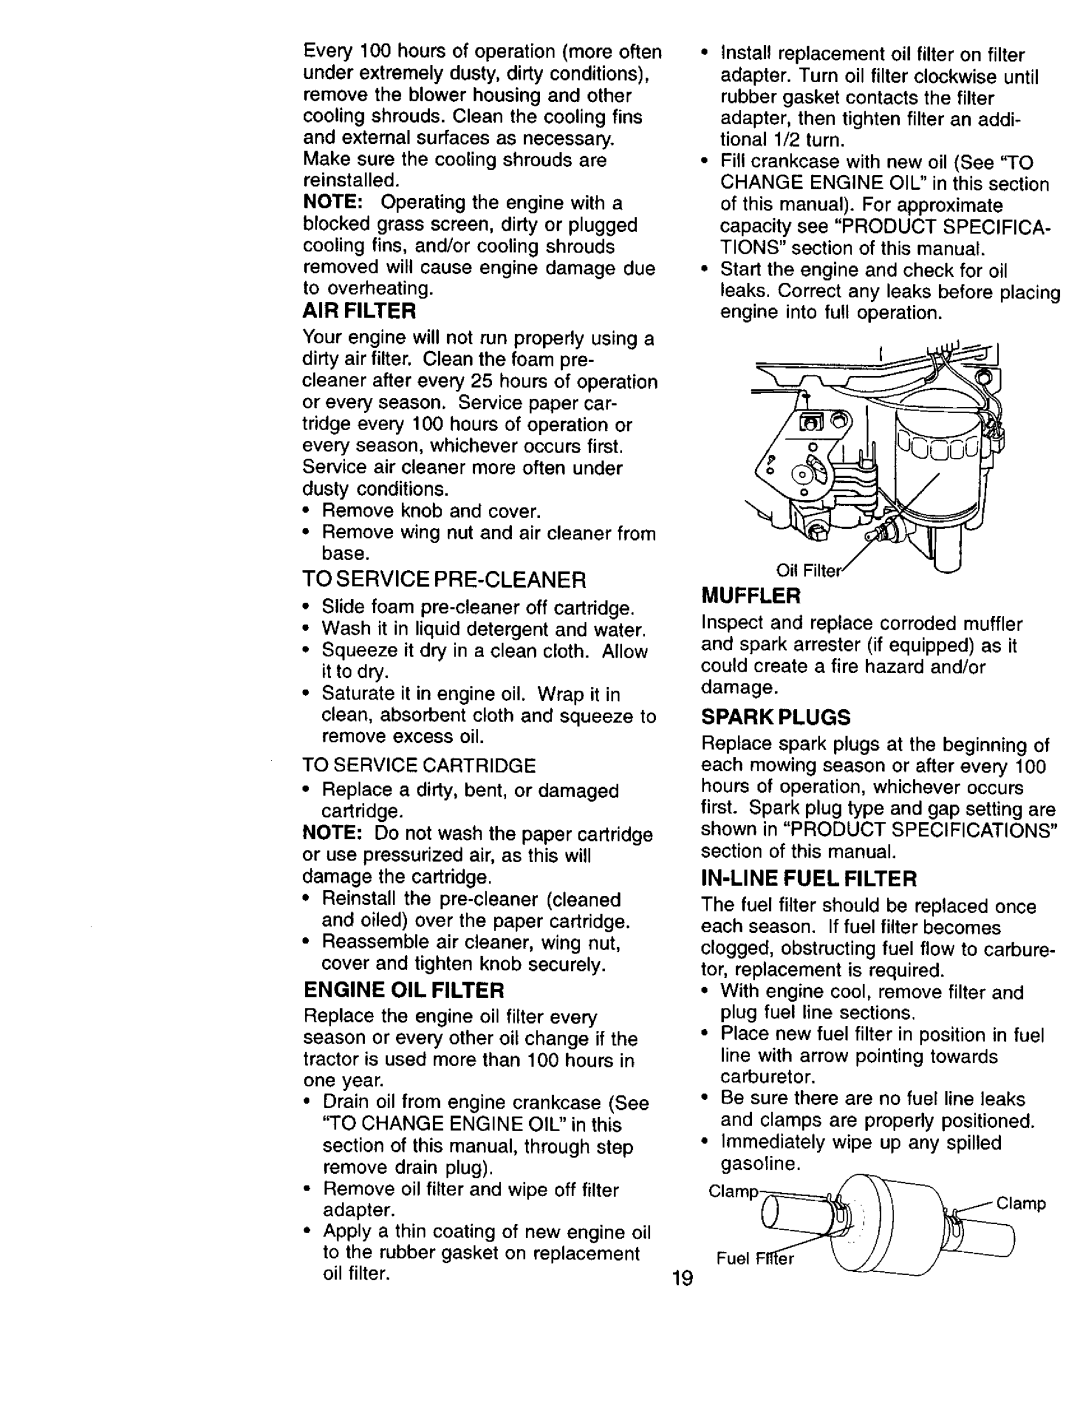 Sears 917.271051 owner manual To Service Pre-Cleaner, Sparkplugs, In-Linefuel Filter 